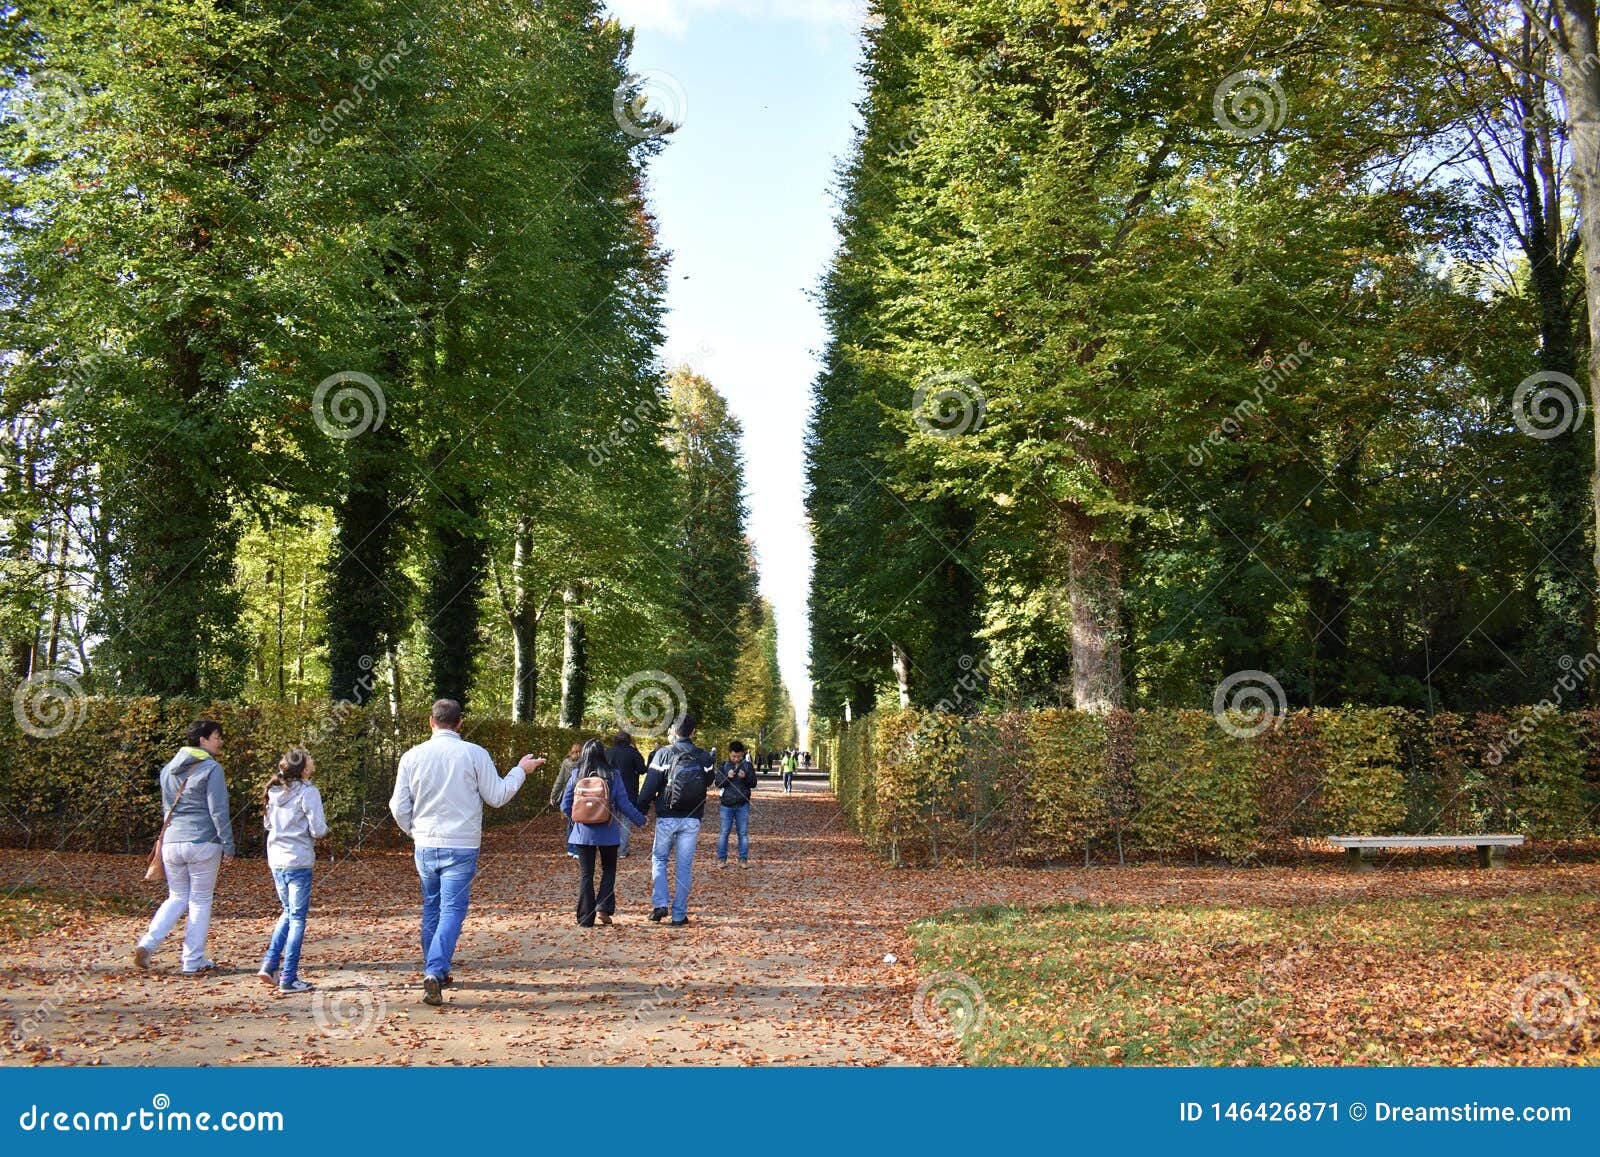 Sanssouci Palace In Berlin Editorial Photo Image Of Turn 146426871